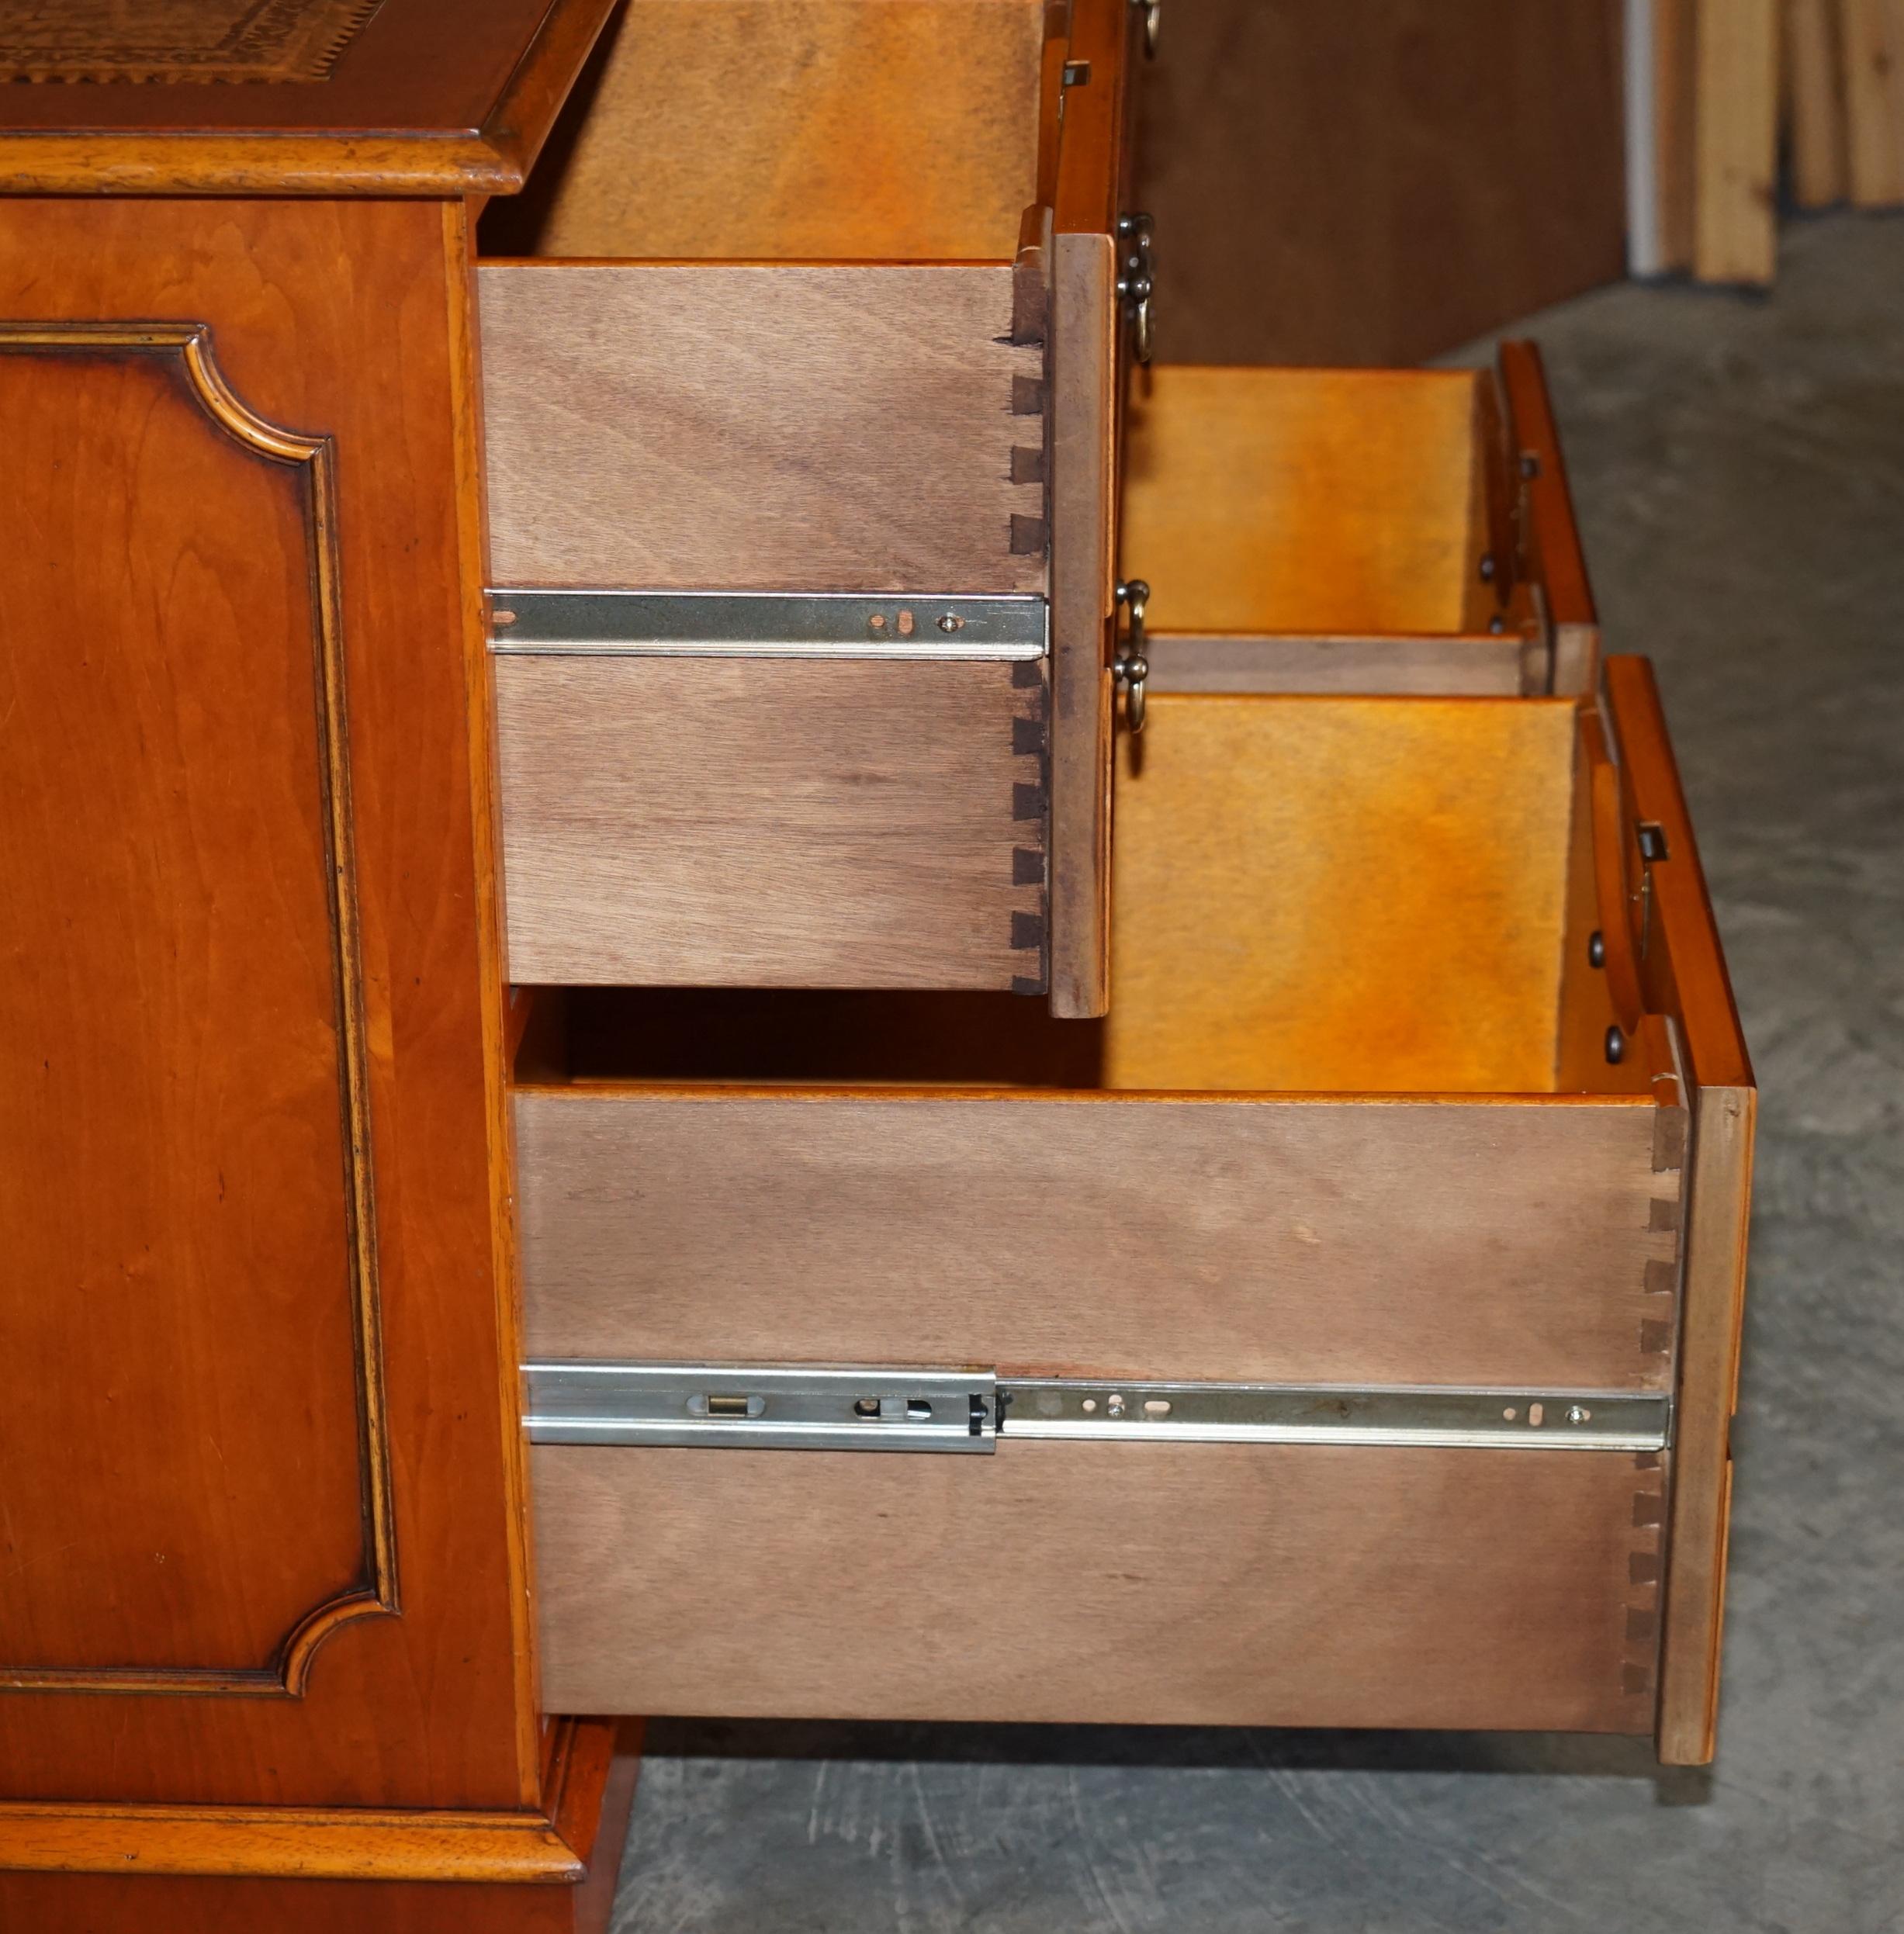 Stunning Yew Wood Brown Leather Double Filing Cabinet for at Home Office Study 9